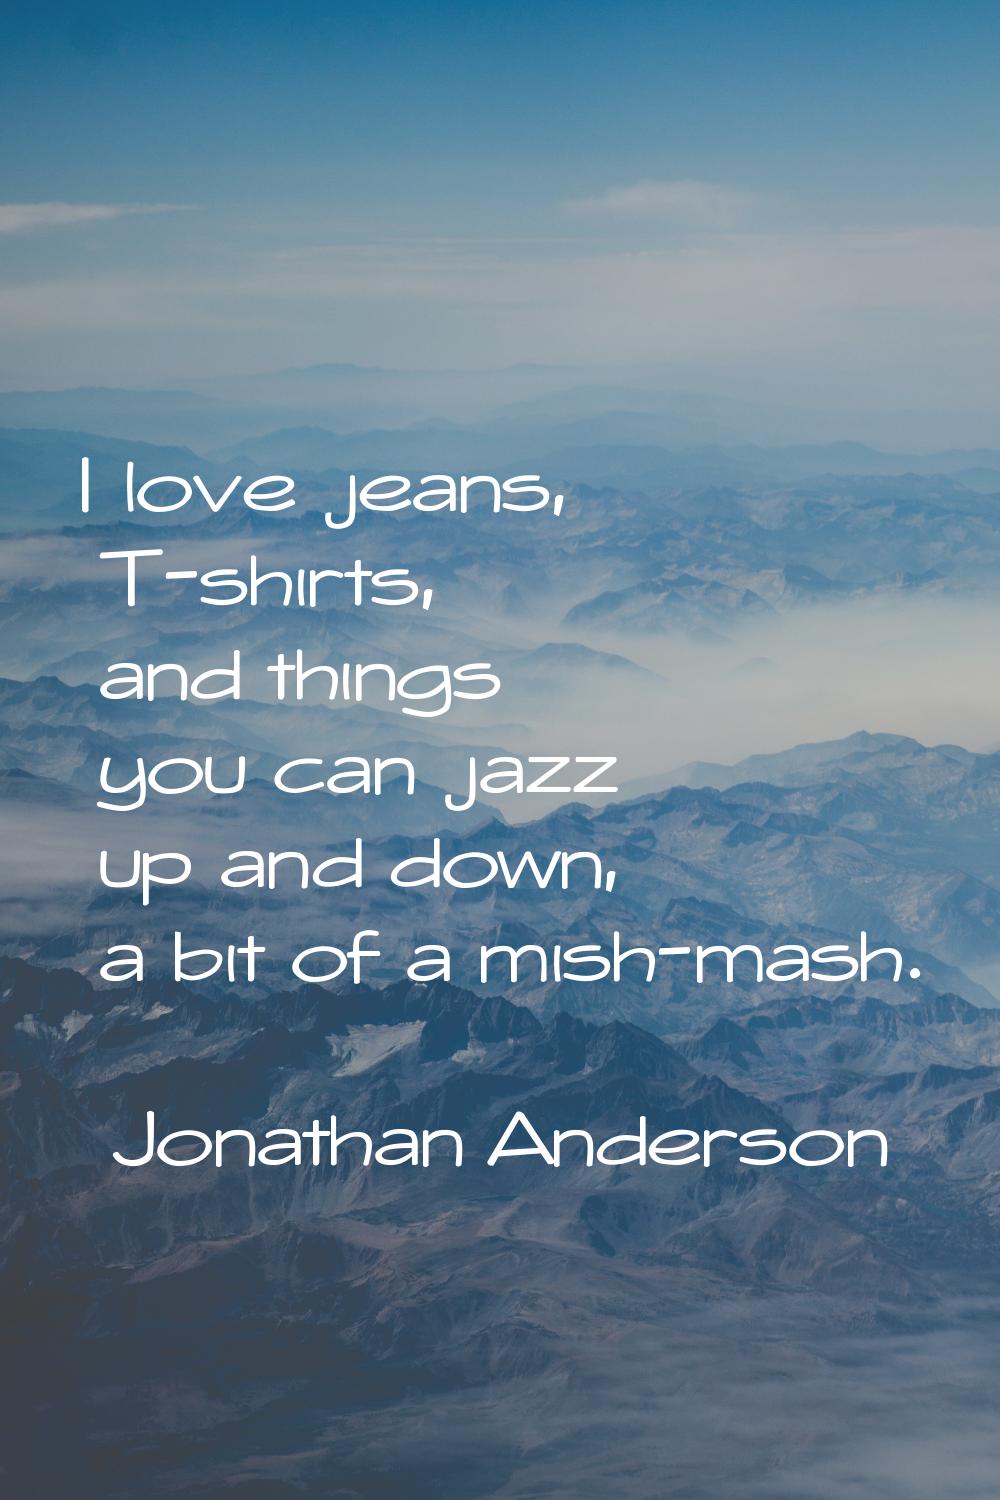 I love jeans, T-shirts, and things you can jazz up and down, a bit of a mish-mash.